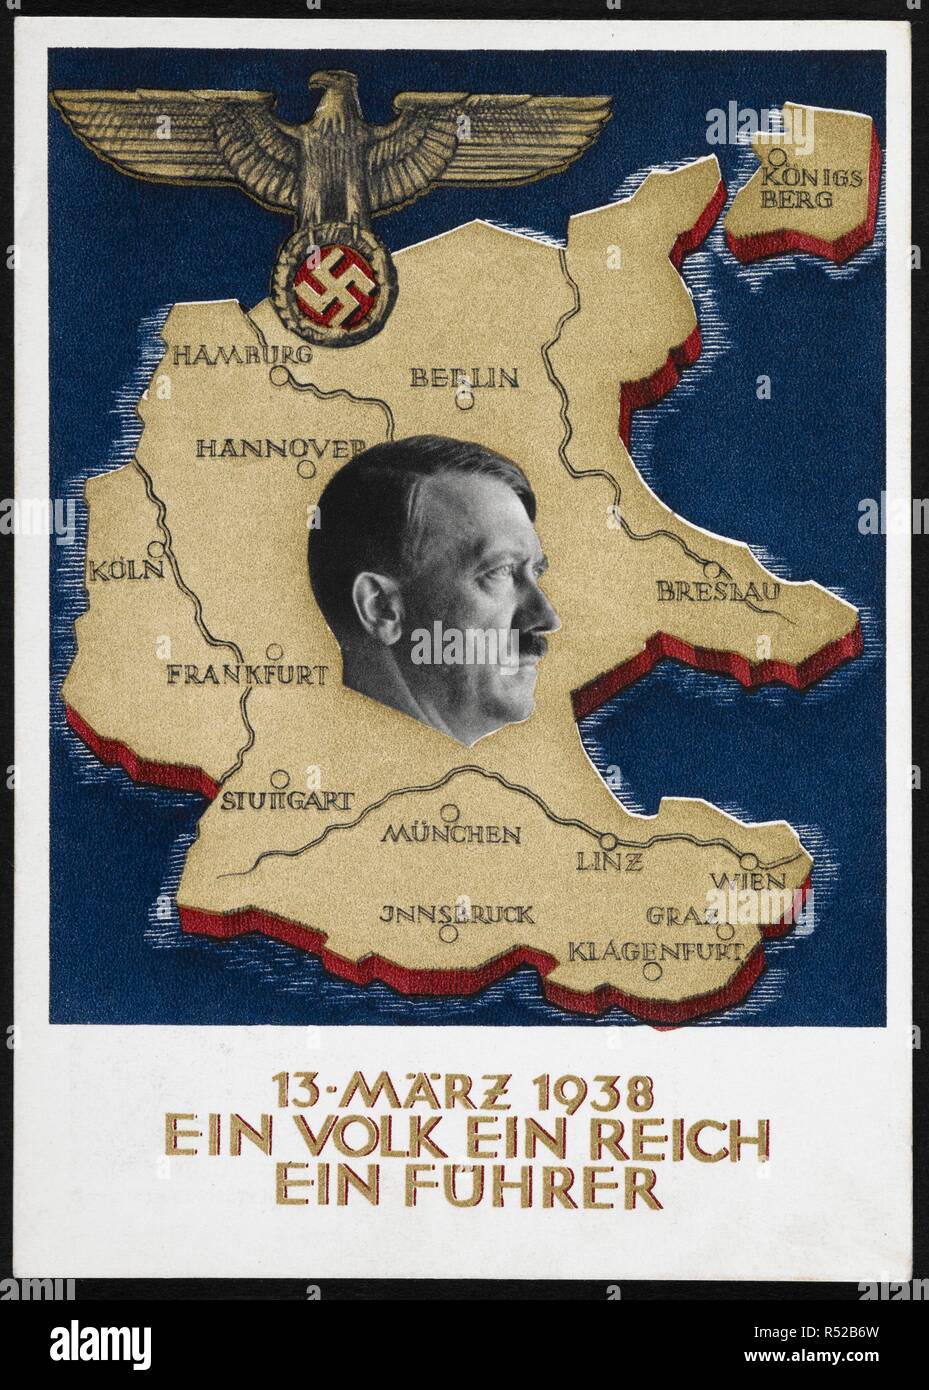 Portrait of Adolf Hitler, over a map of Germany. An Eagle and swastika emblem. A collection of cartographical picture postcards illustrating the political situation in Europe. Colour image. Source: Maps.C.1.a.9.(38). Language: German. Stock Photo